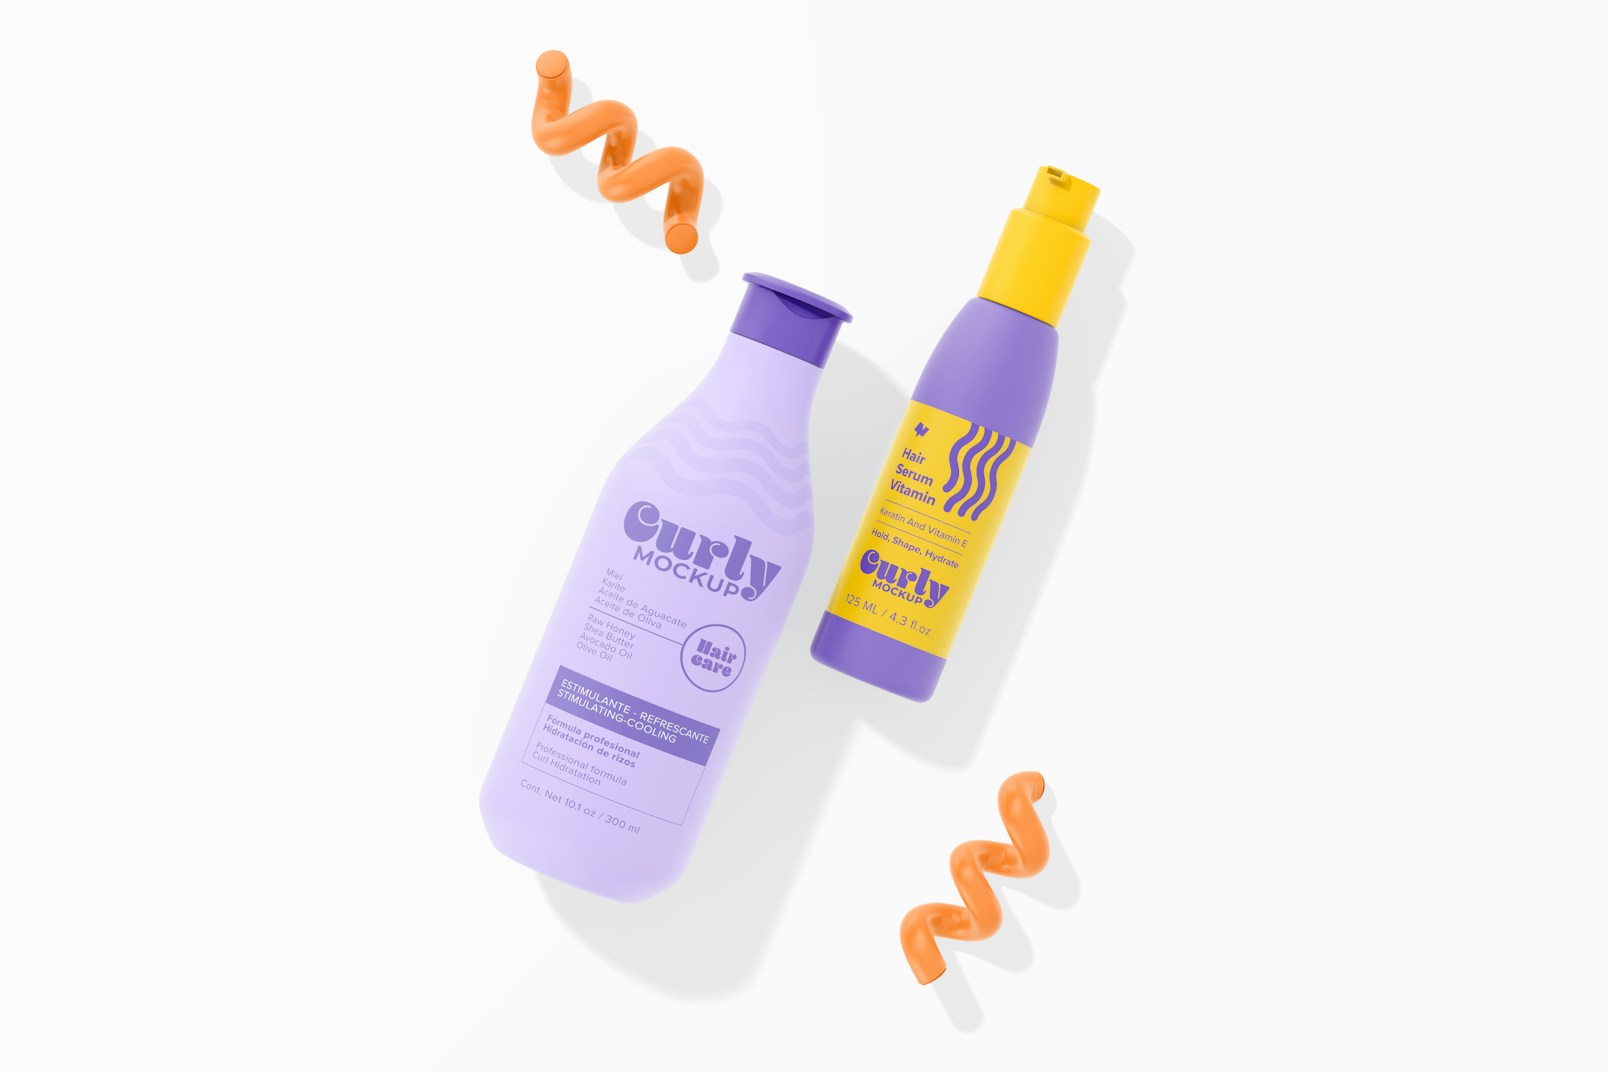 Curly Hair Product Bottles Mockup, Top View